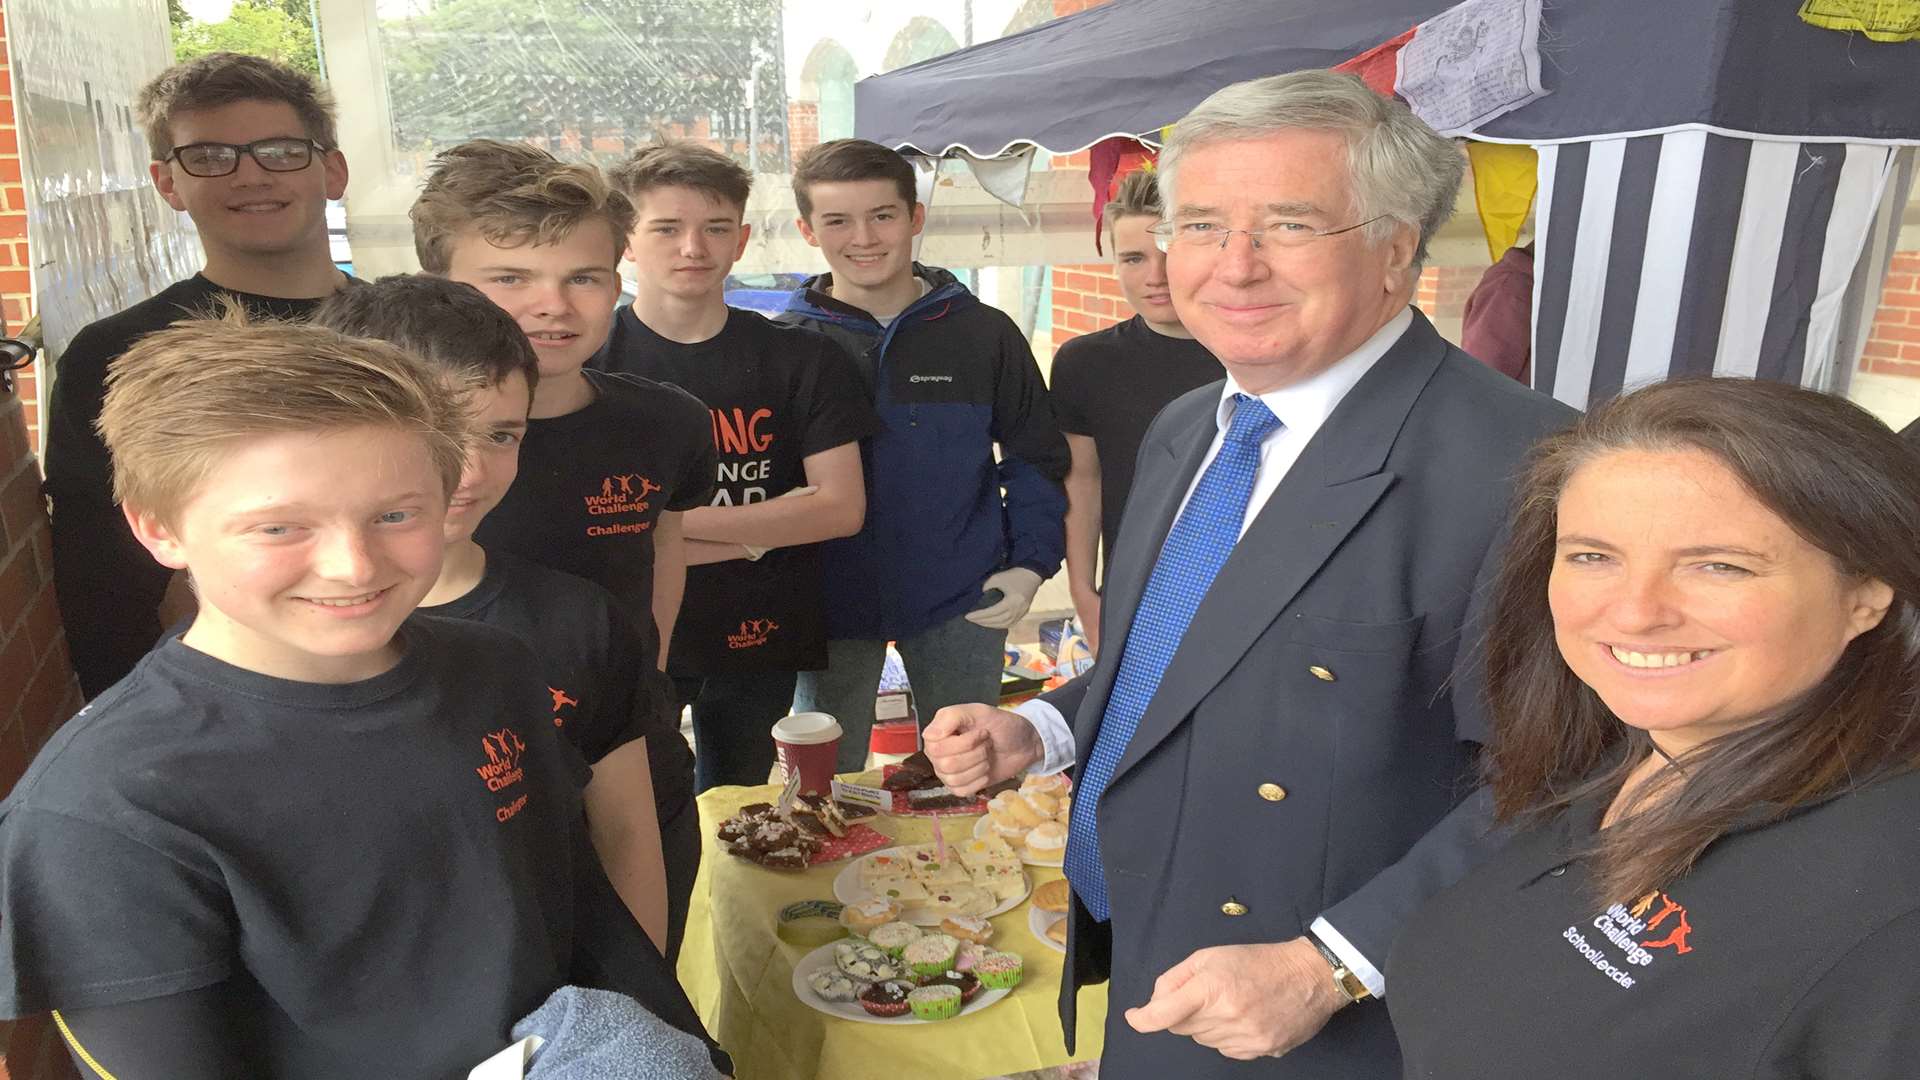 Michael Fallon arrived at the cake stand to show his support